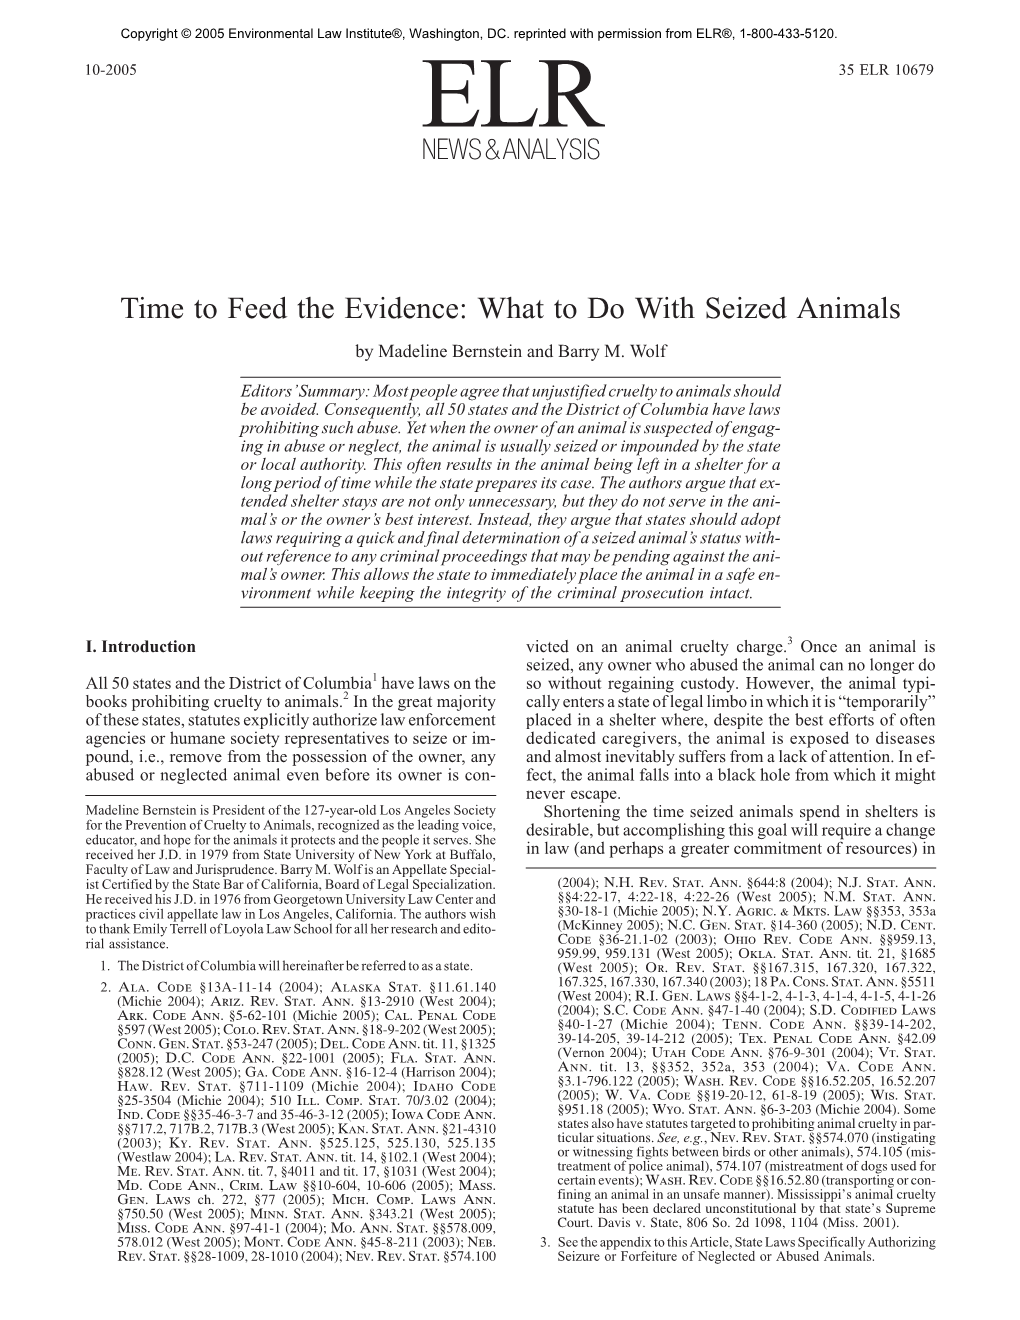 Time to Feed the Evidence: What to Do with Seized Animals by Madeline Bernstein and Barry M